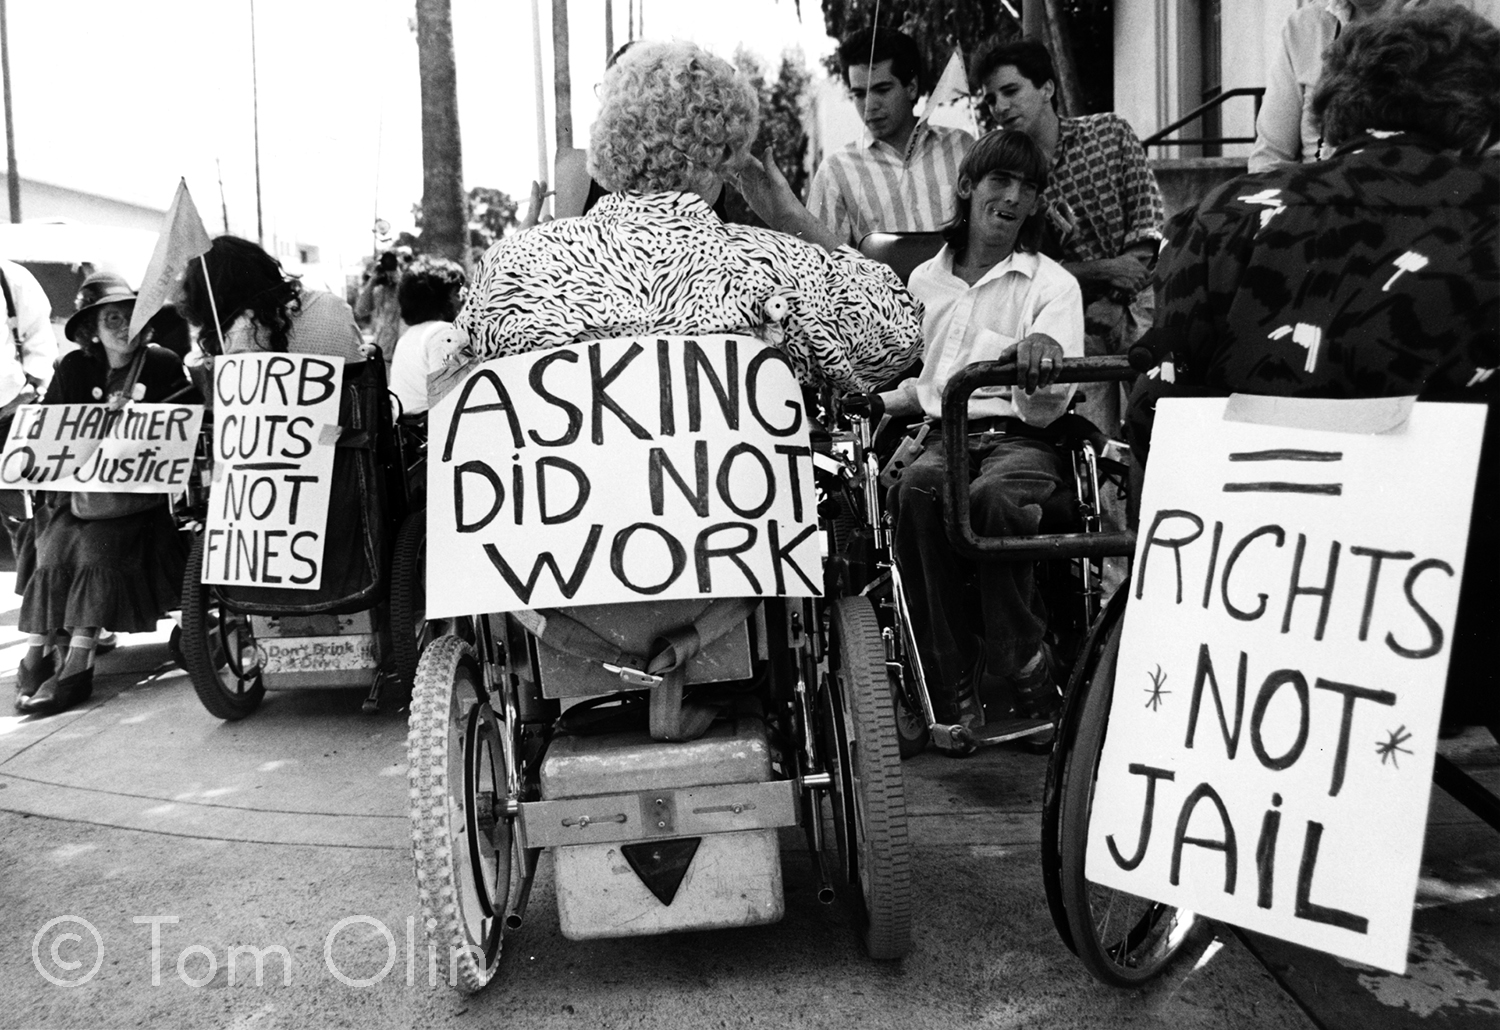 Black and white photograph of several disability activists in wheelchairs. They are holding signs that say I'd hammer out justice, curb cuts not fines, asking did not work, and rights not jail.